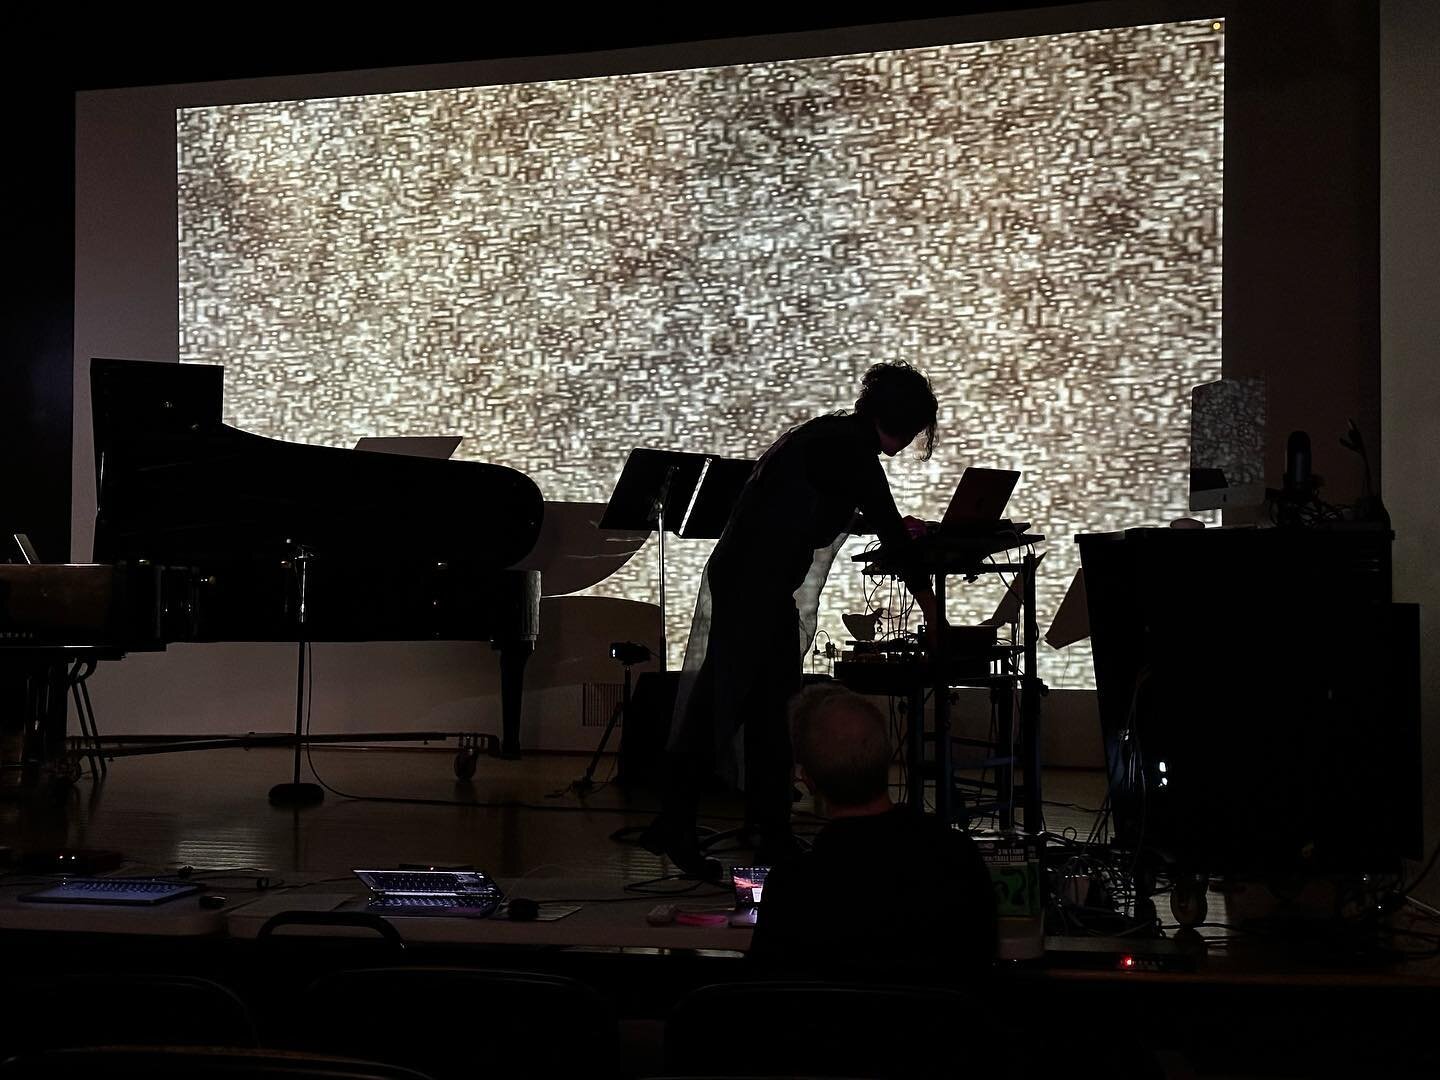 A few shots from last night&rsquo;s show at Columbia College with the Chicago Composers Consortium💥🔊 also so grateful to have had the chance to give a talk in the music dept&rsquo;s composition seminar yesterday afternoon!

I had so much fun playin